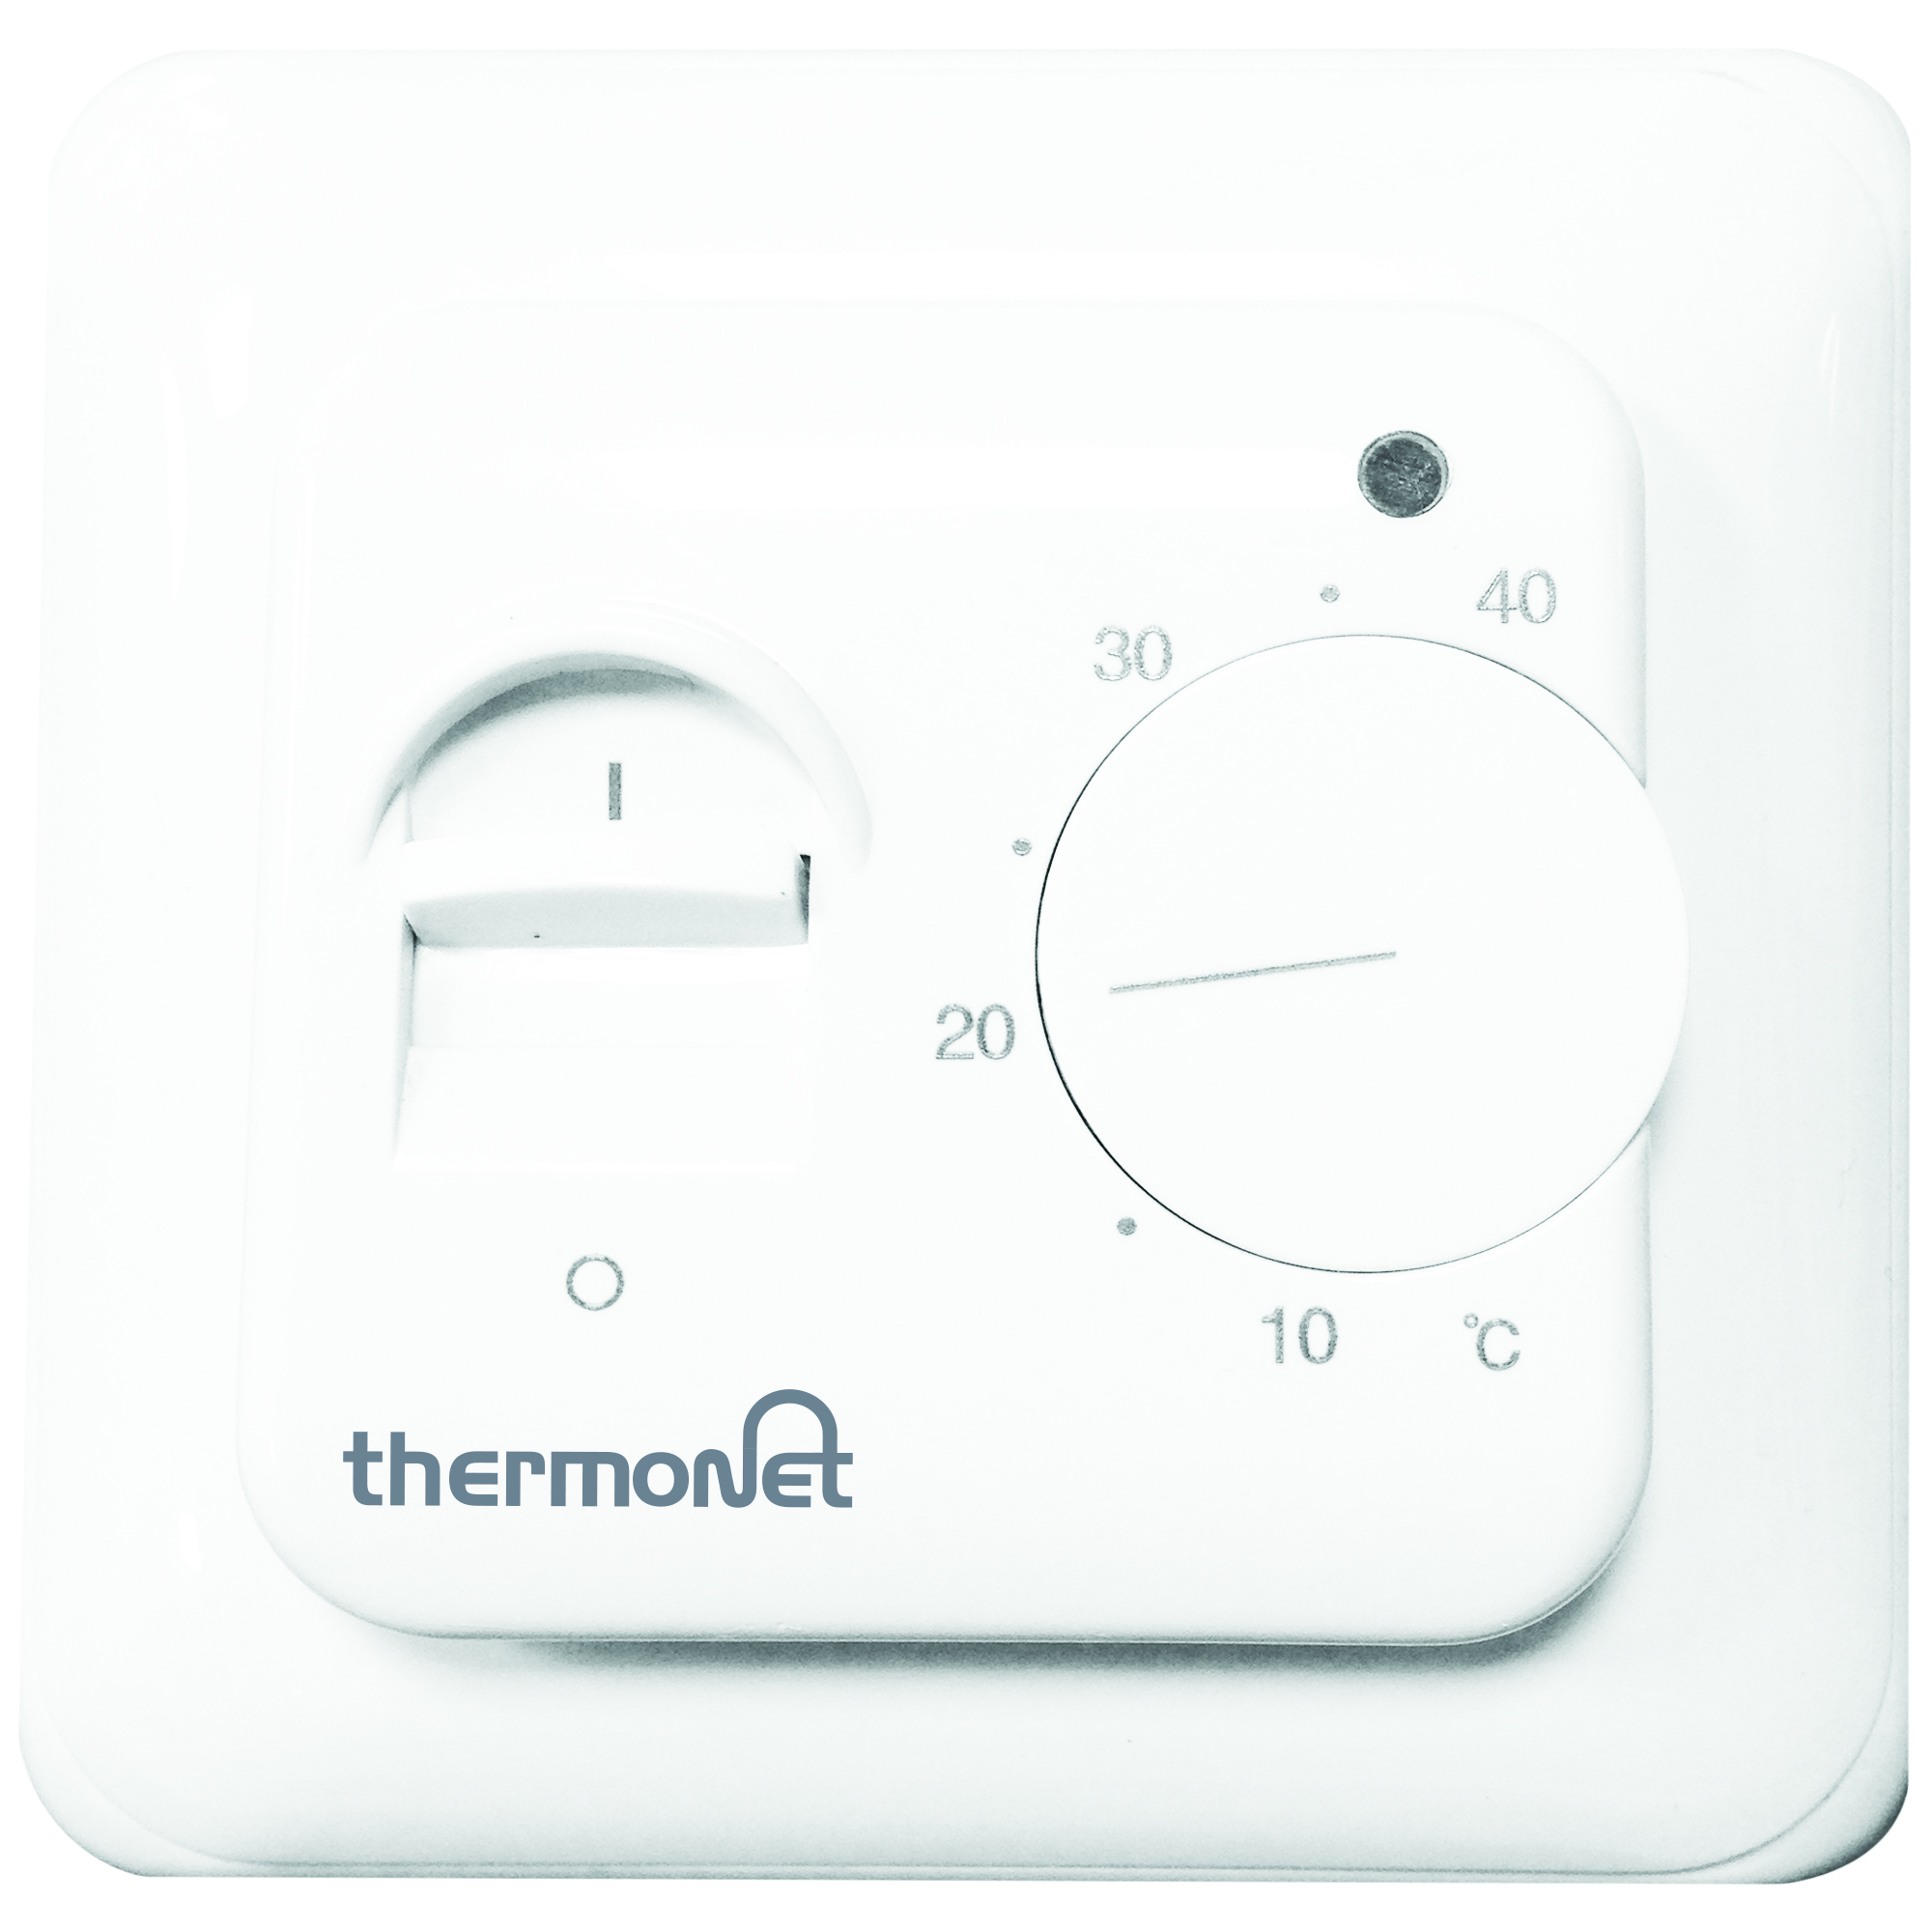 proselect thermostat manual